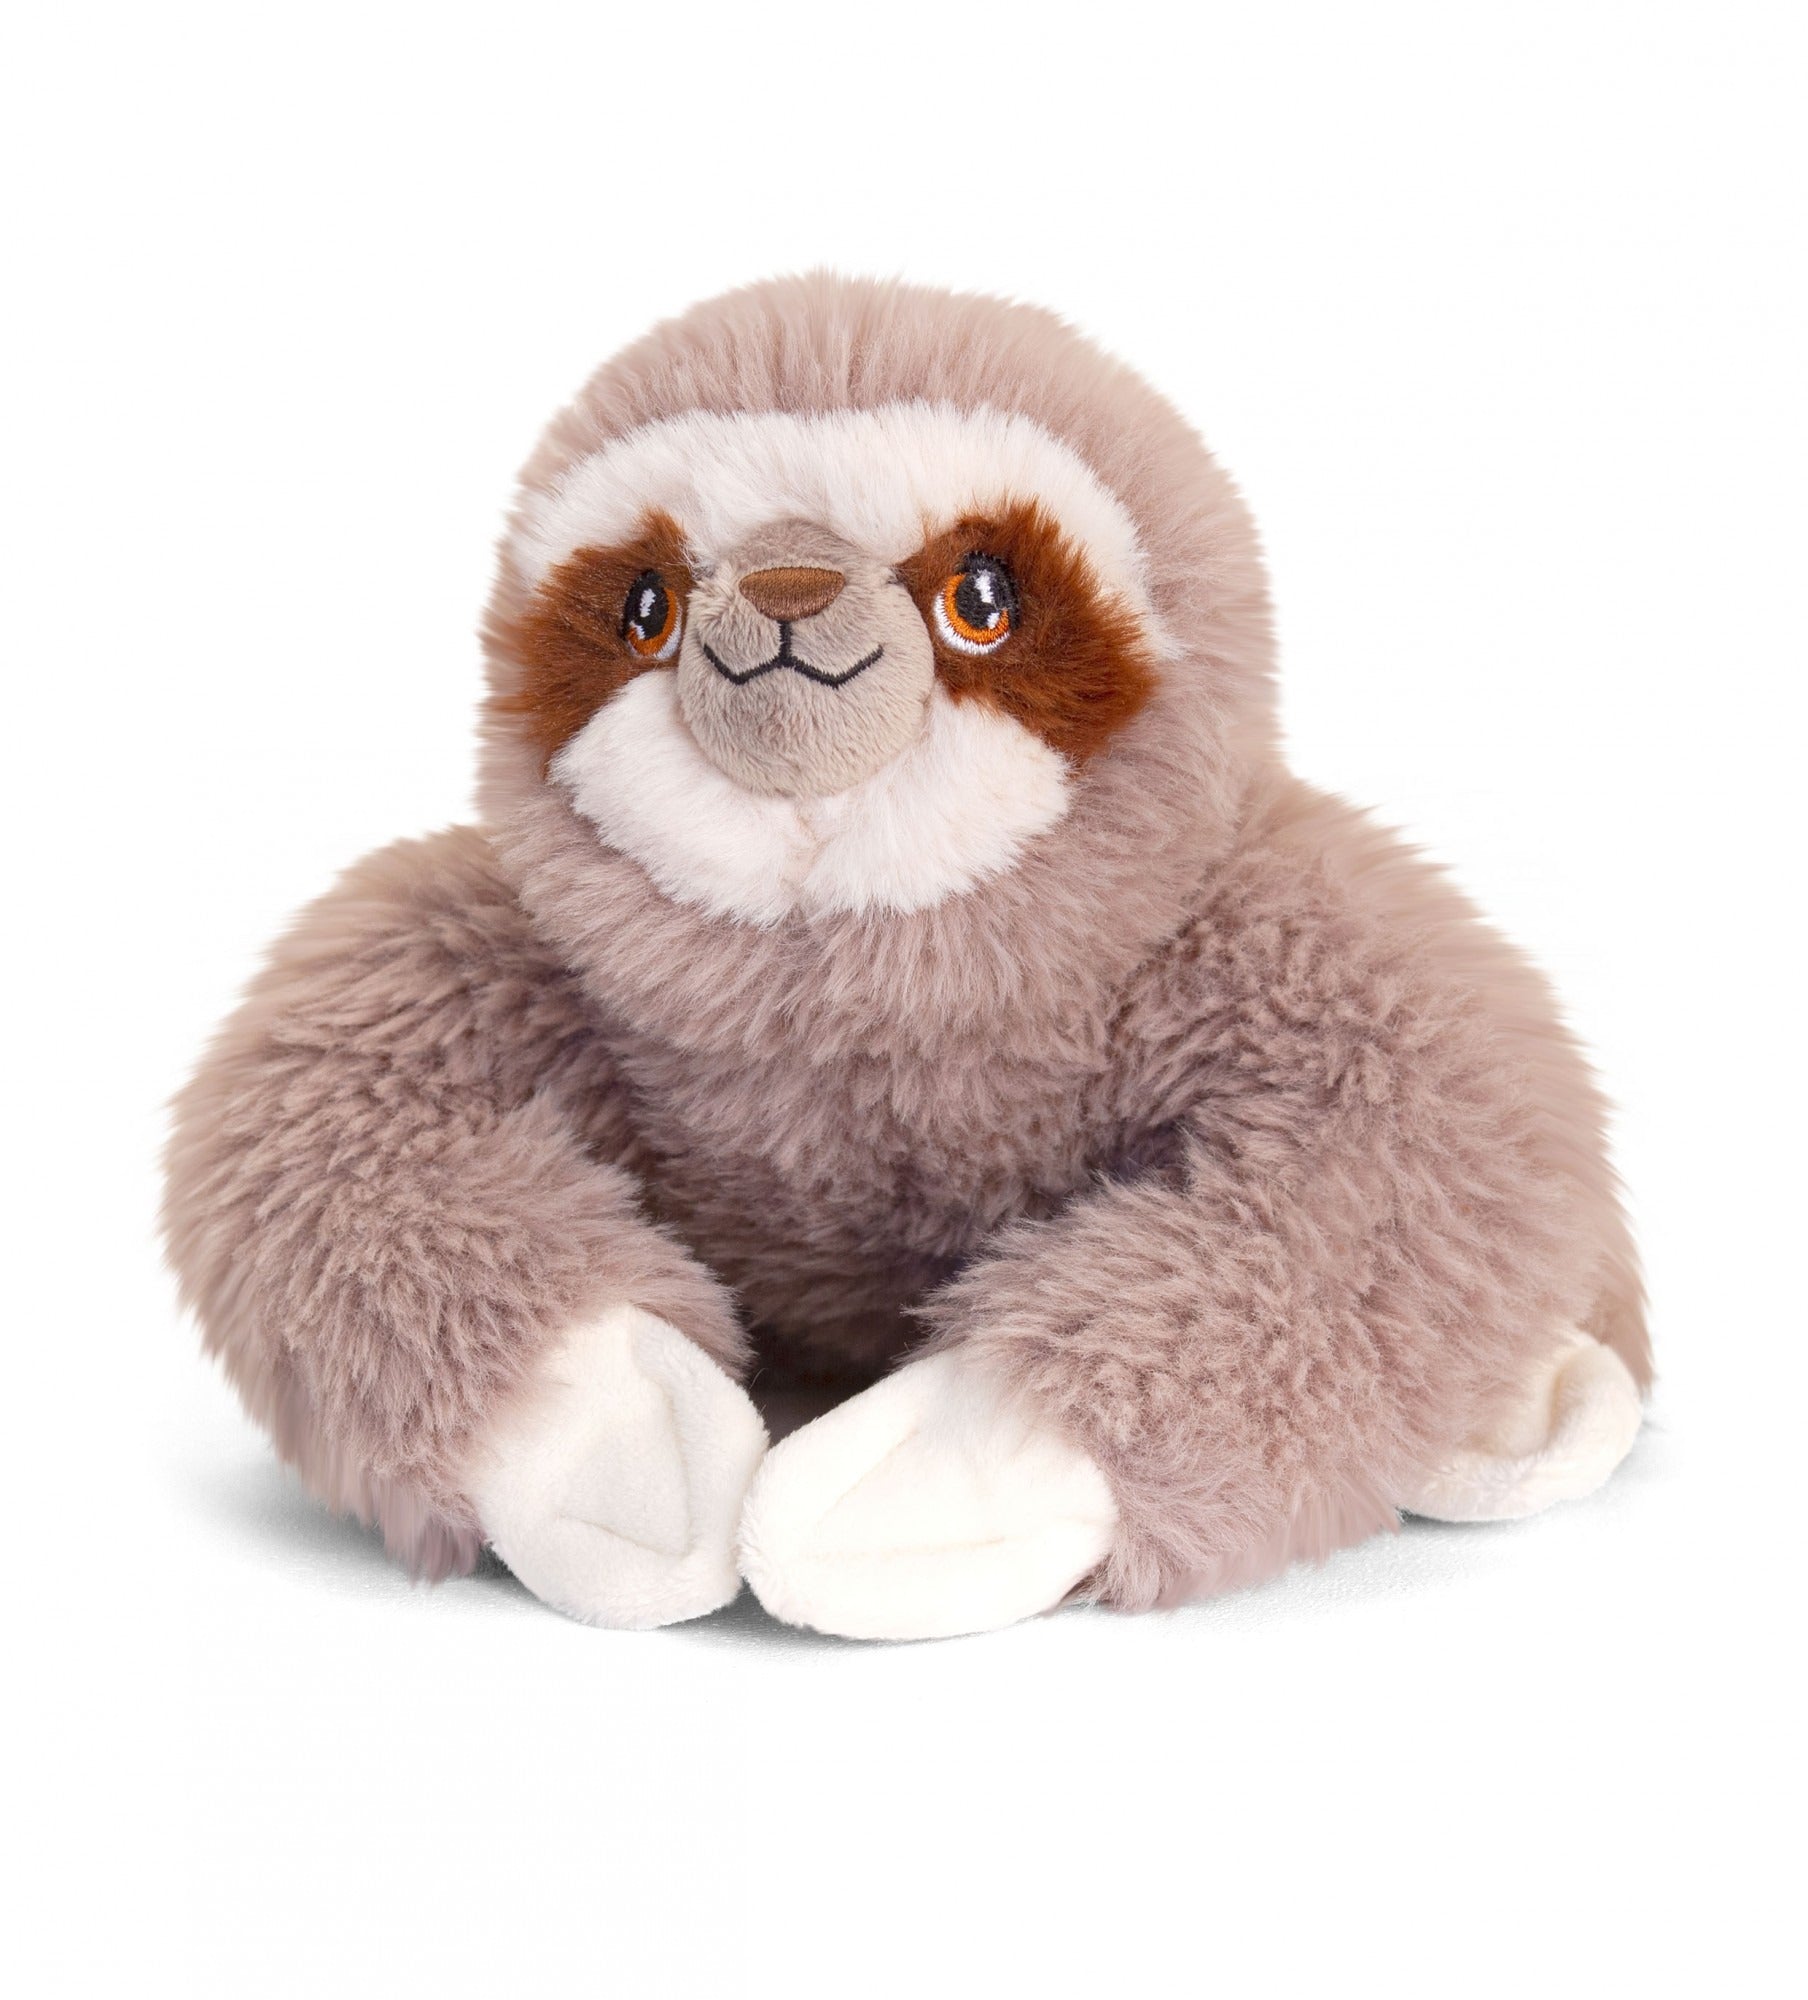 View Keeleco Sloth 18cm information